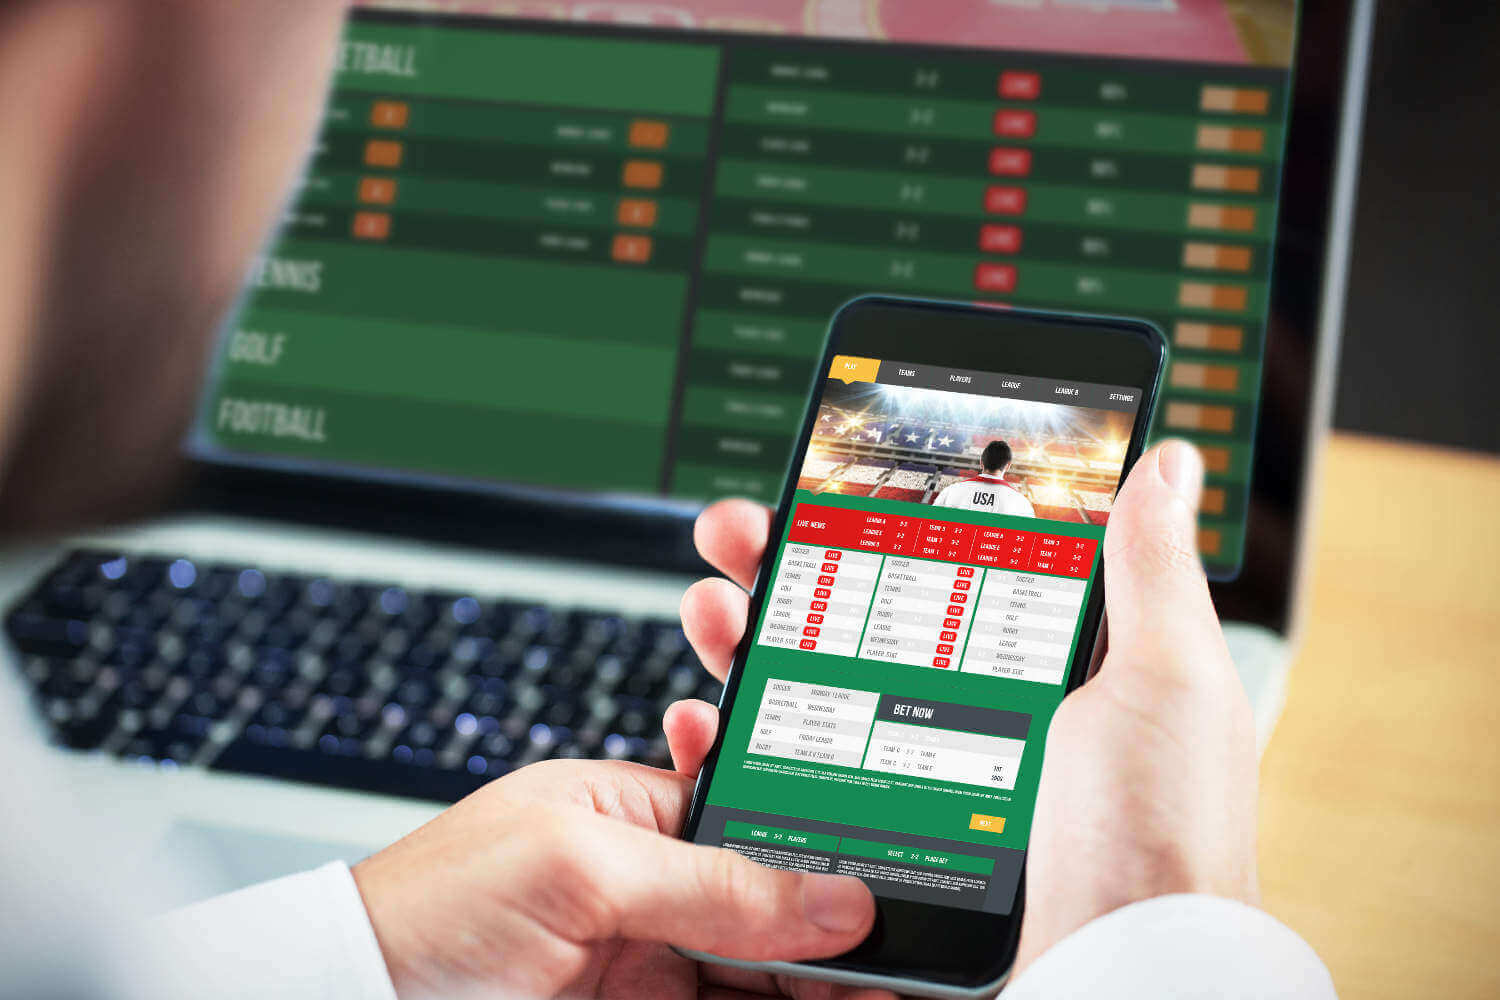 How Would You Choose A Sports Betting Site Over Internet?